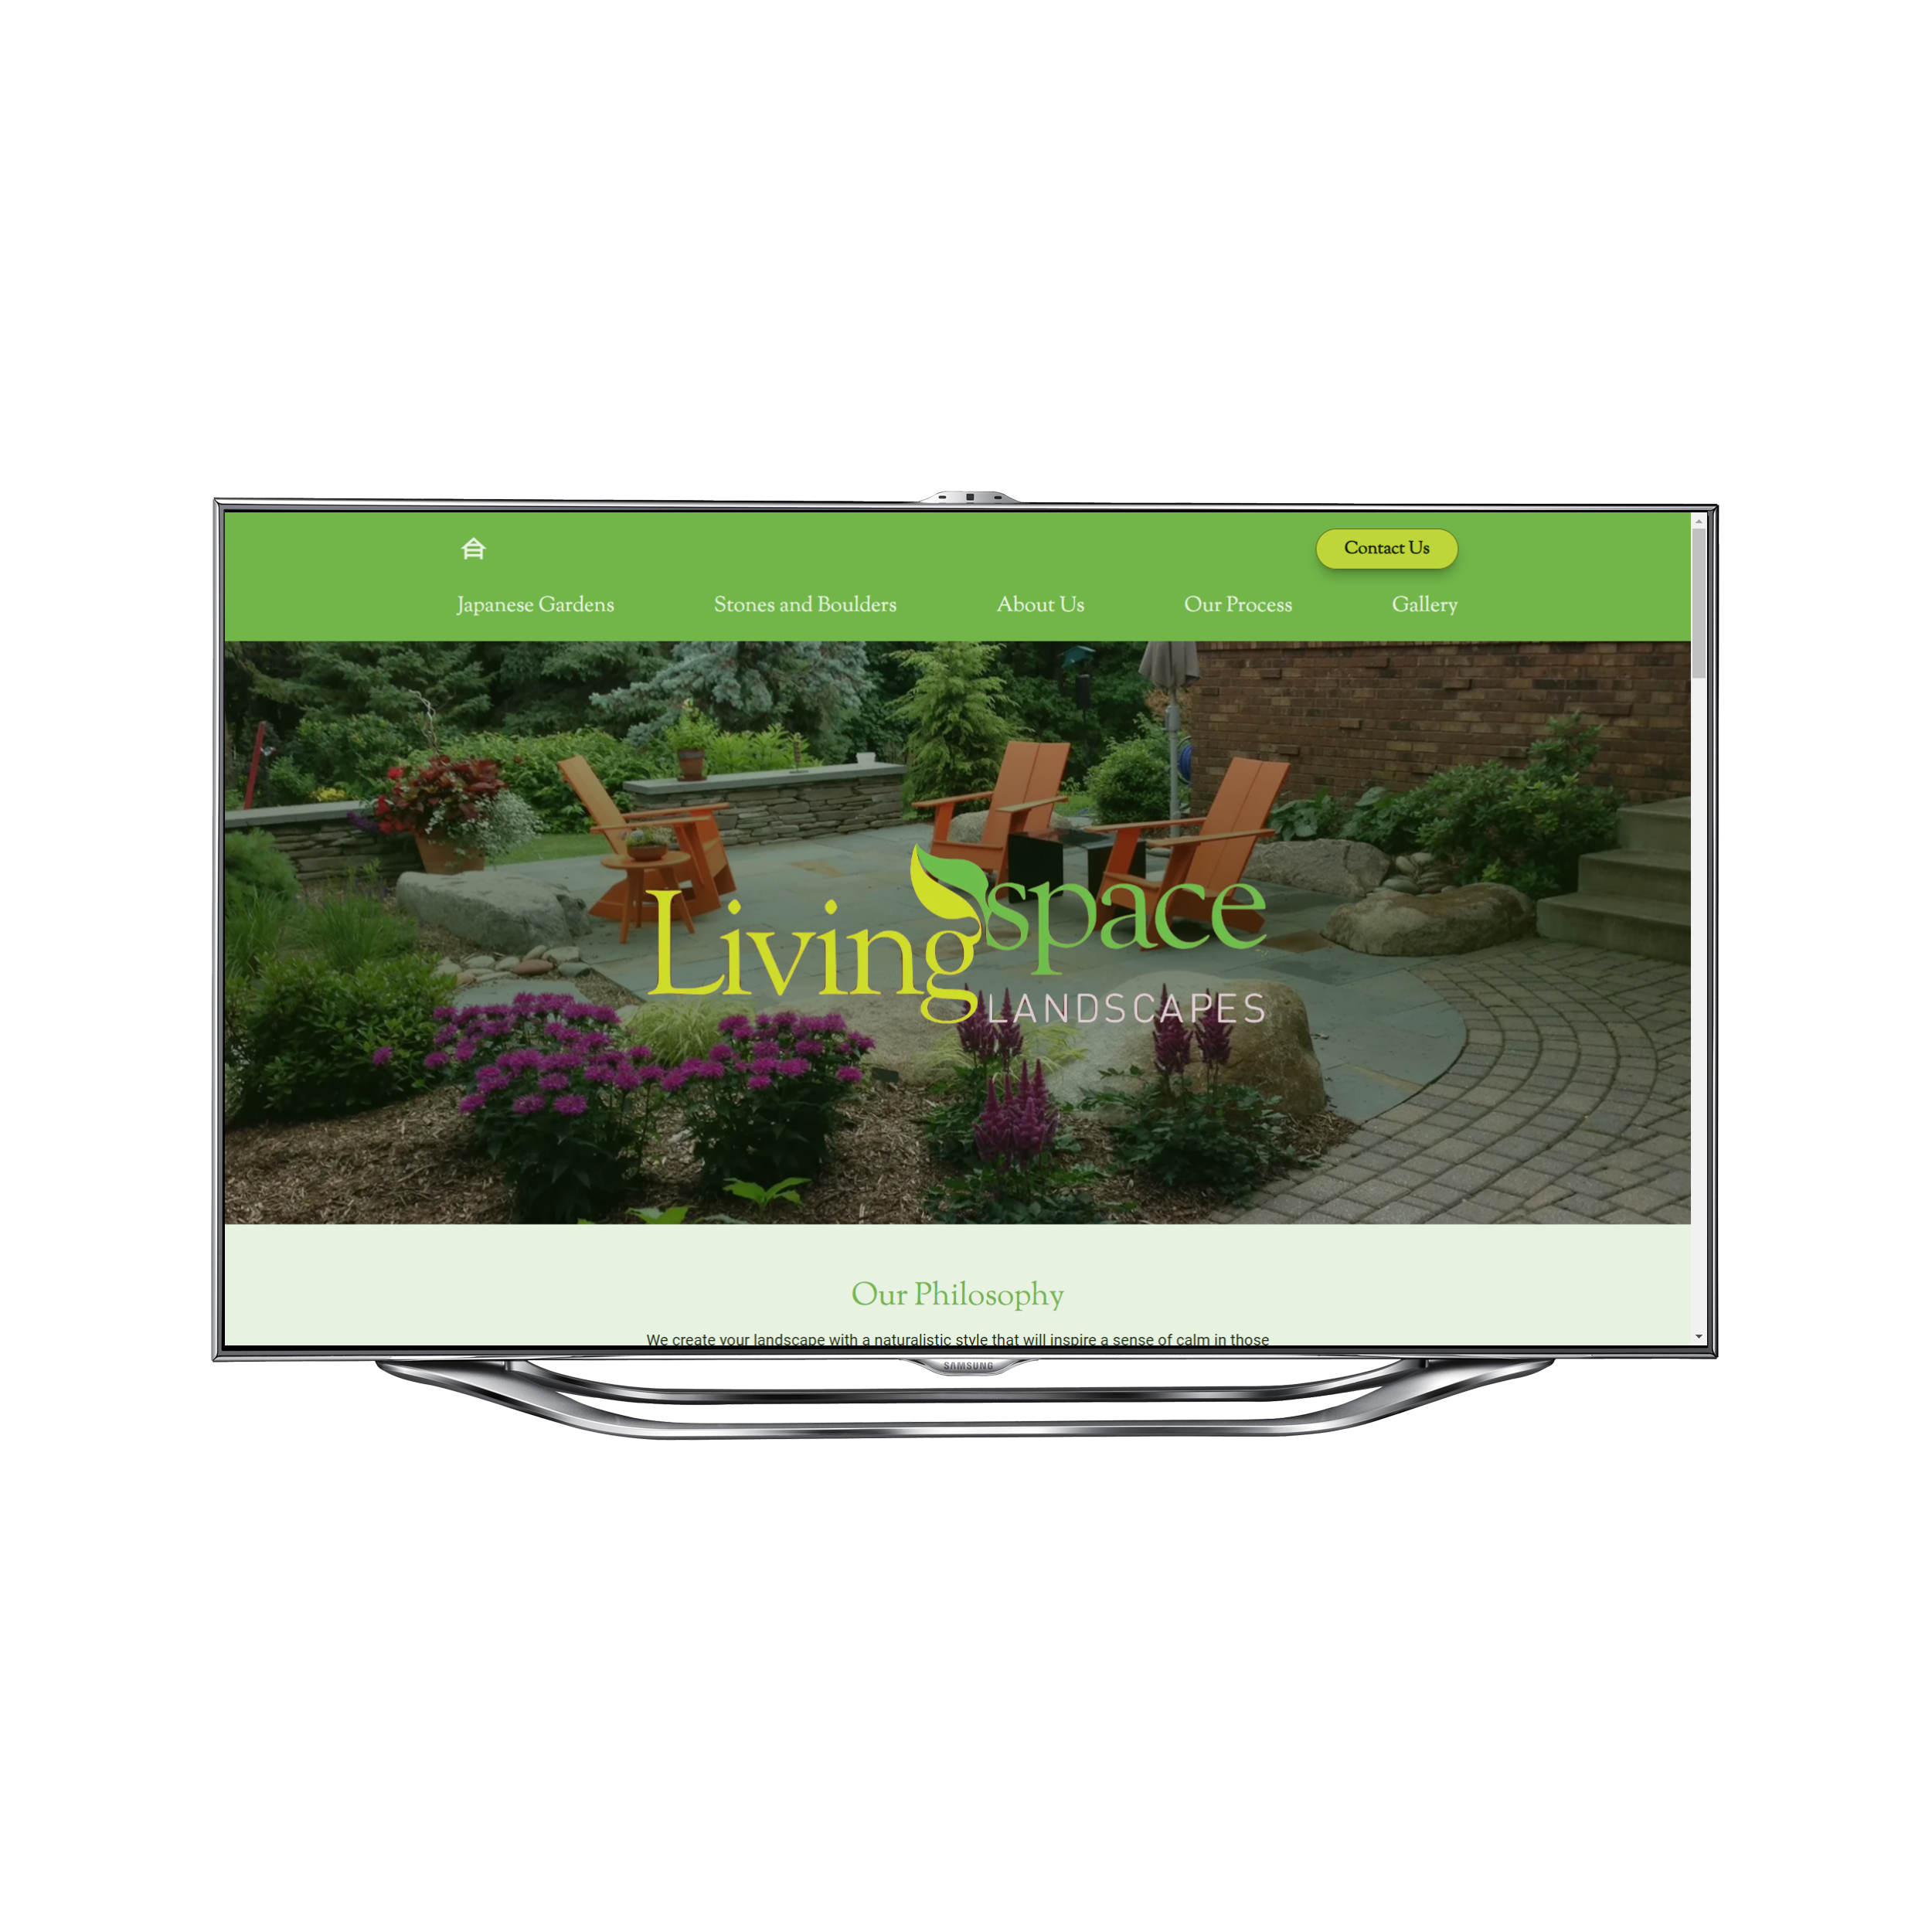 Living Space Landscapes Website Example